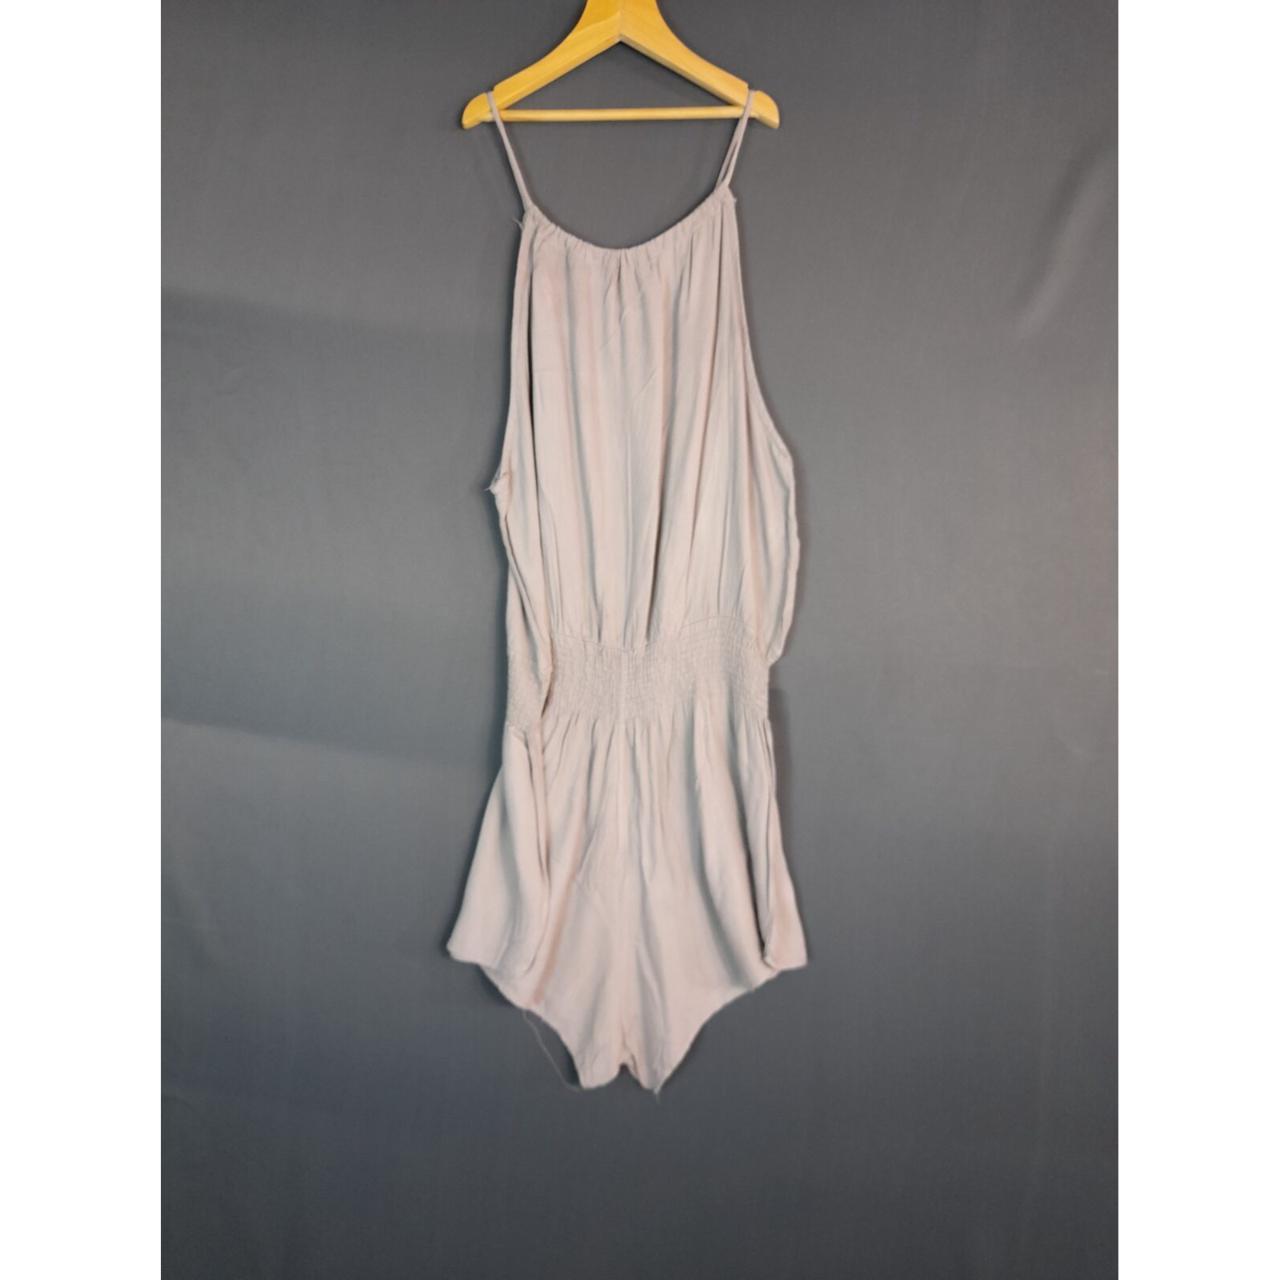 Product Image 1 - Brandy Melville Women’s Grey Strappy